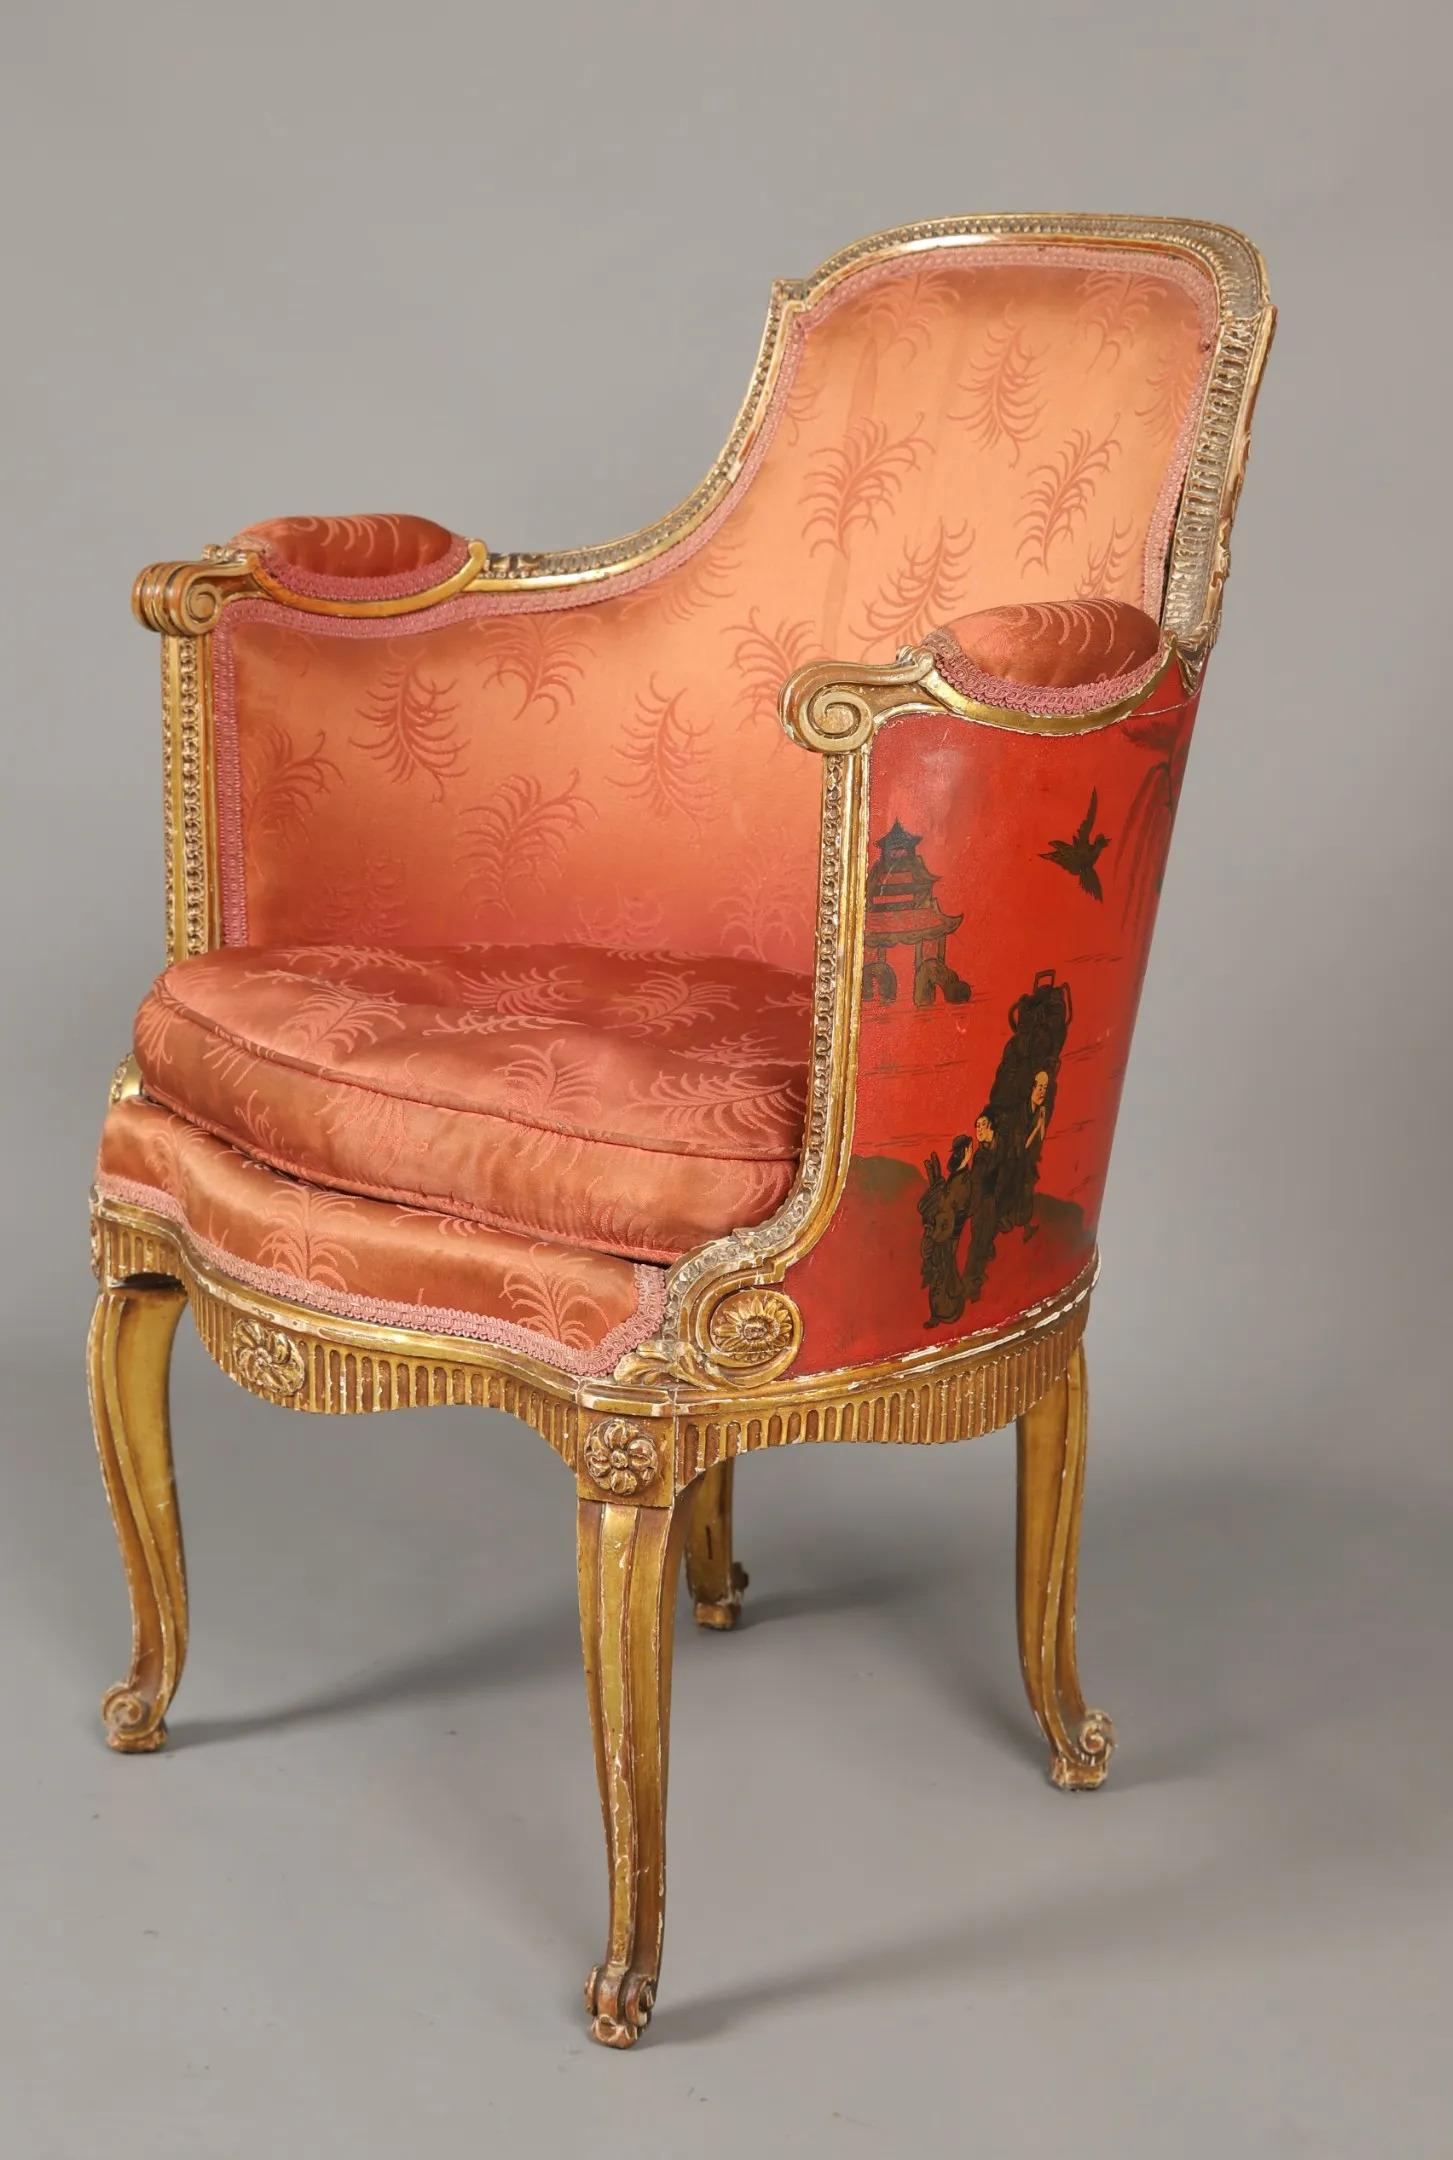 Gilt rare and original Louis XV transition armchair with back and side lacquered  For Sale